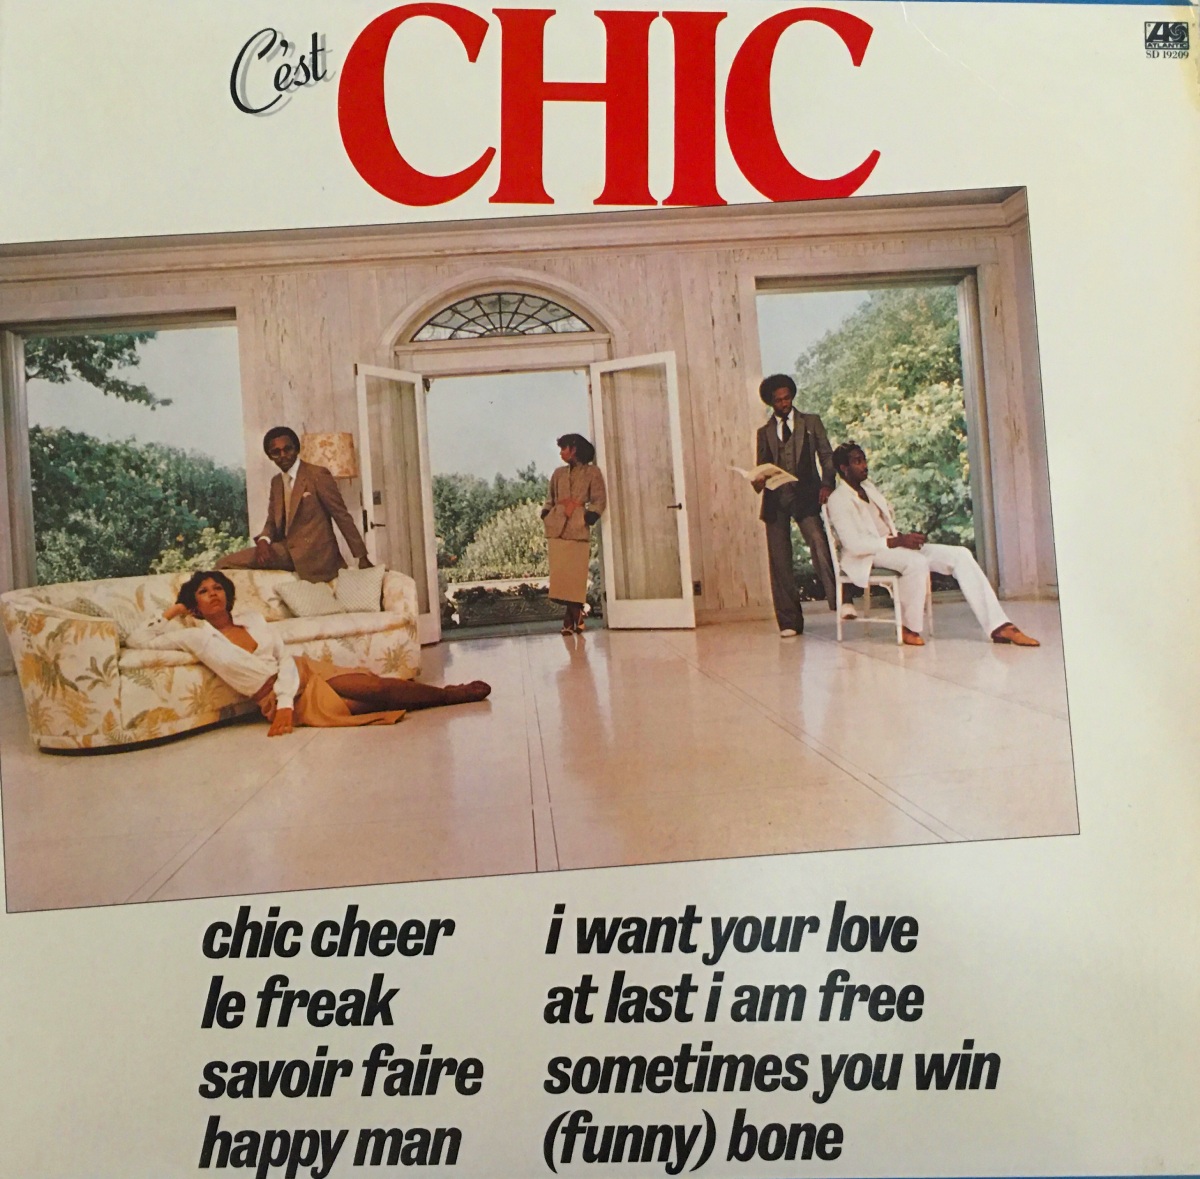 Cover of "C'est Chic" (1978) by Chic